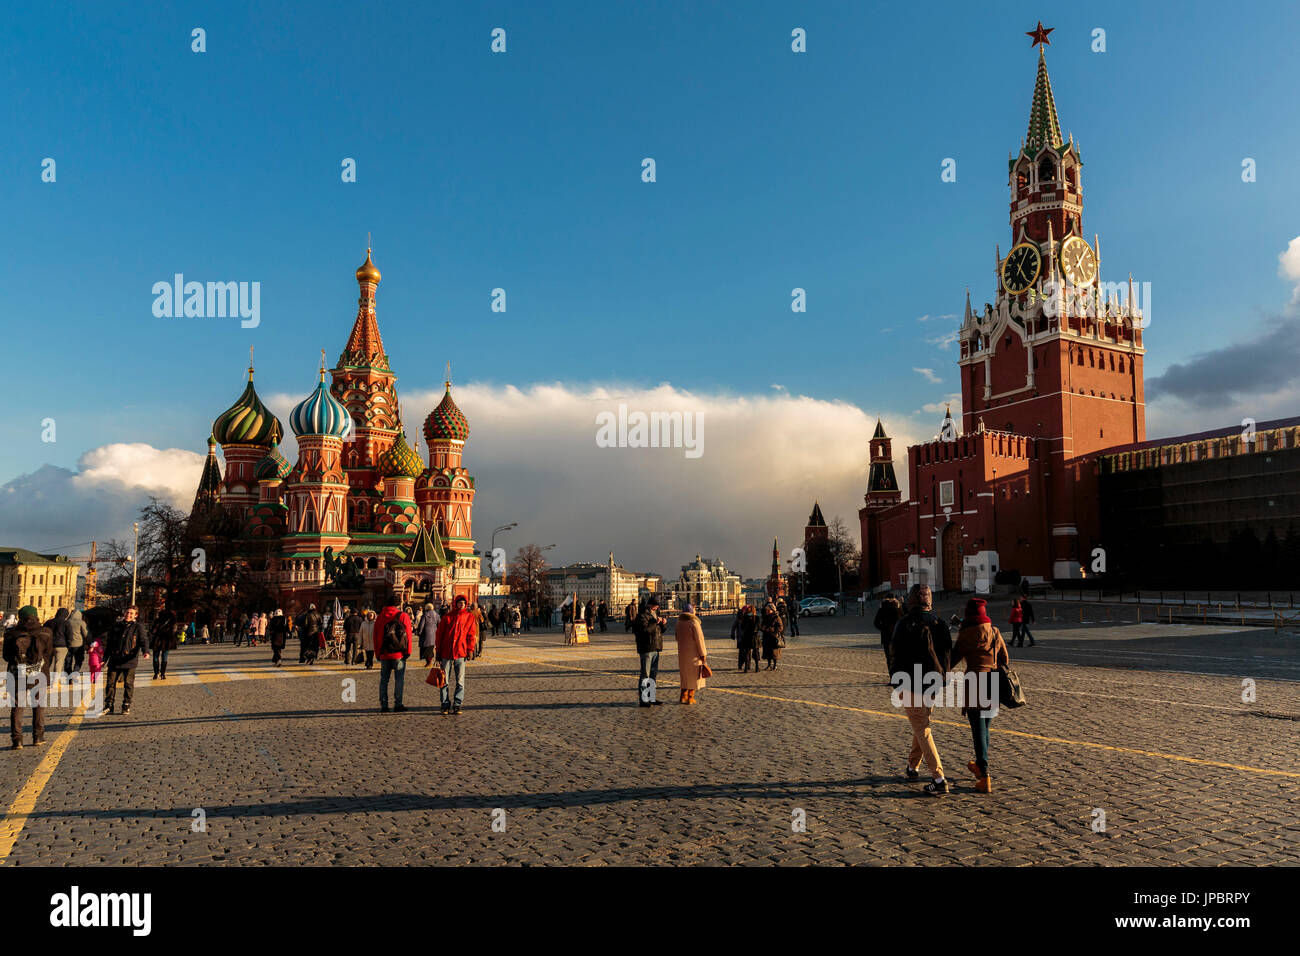 Russia, Moscow, Red Square, Kremlin, St. Basil's Cathedral and Kremlin Spasskaya Tower Stock Photo